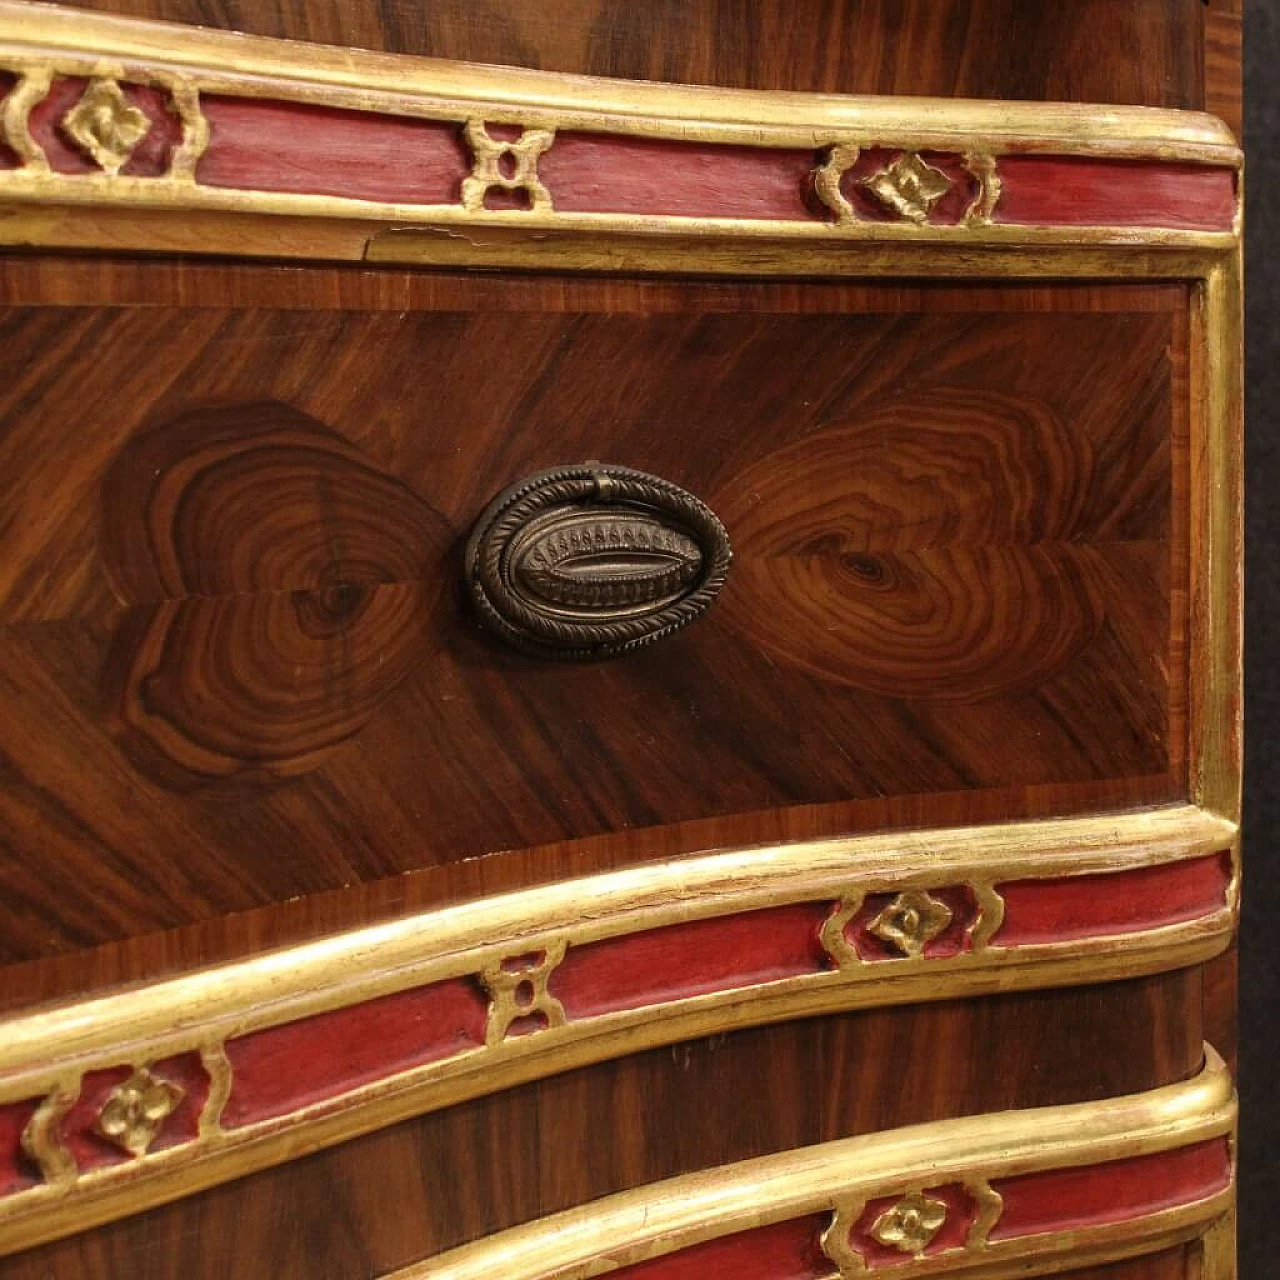 Genoese inlaid, lacquered and gilded wood dresser 12